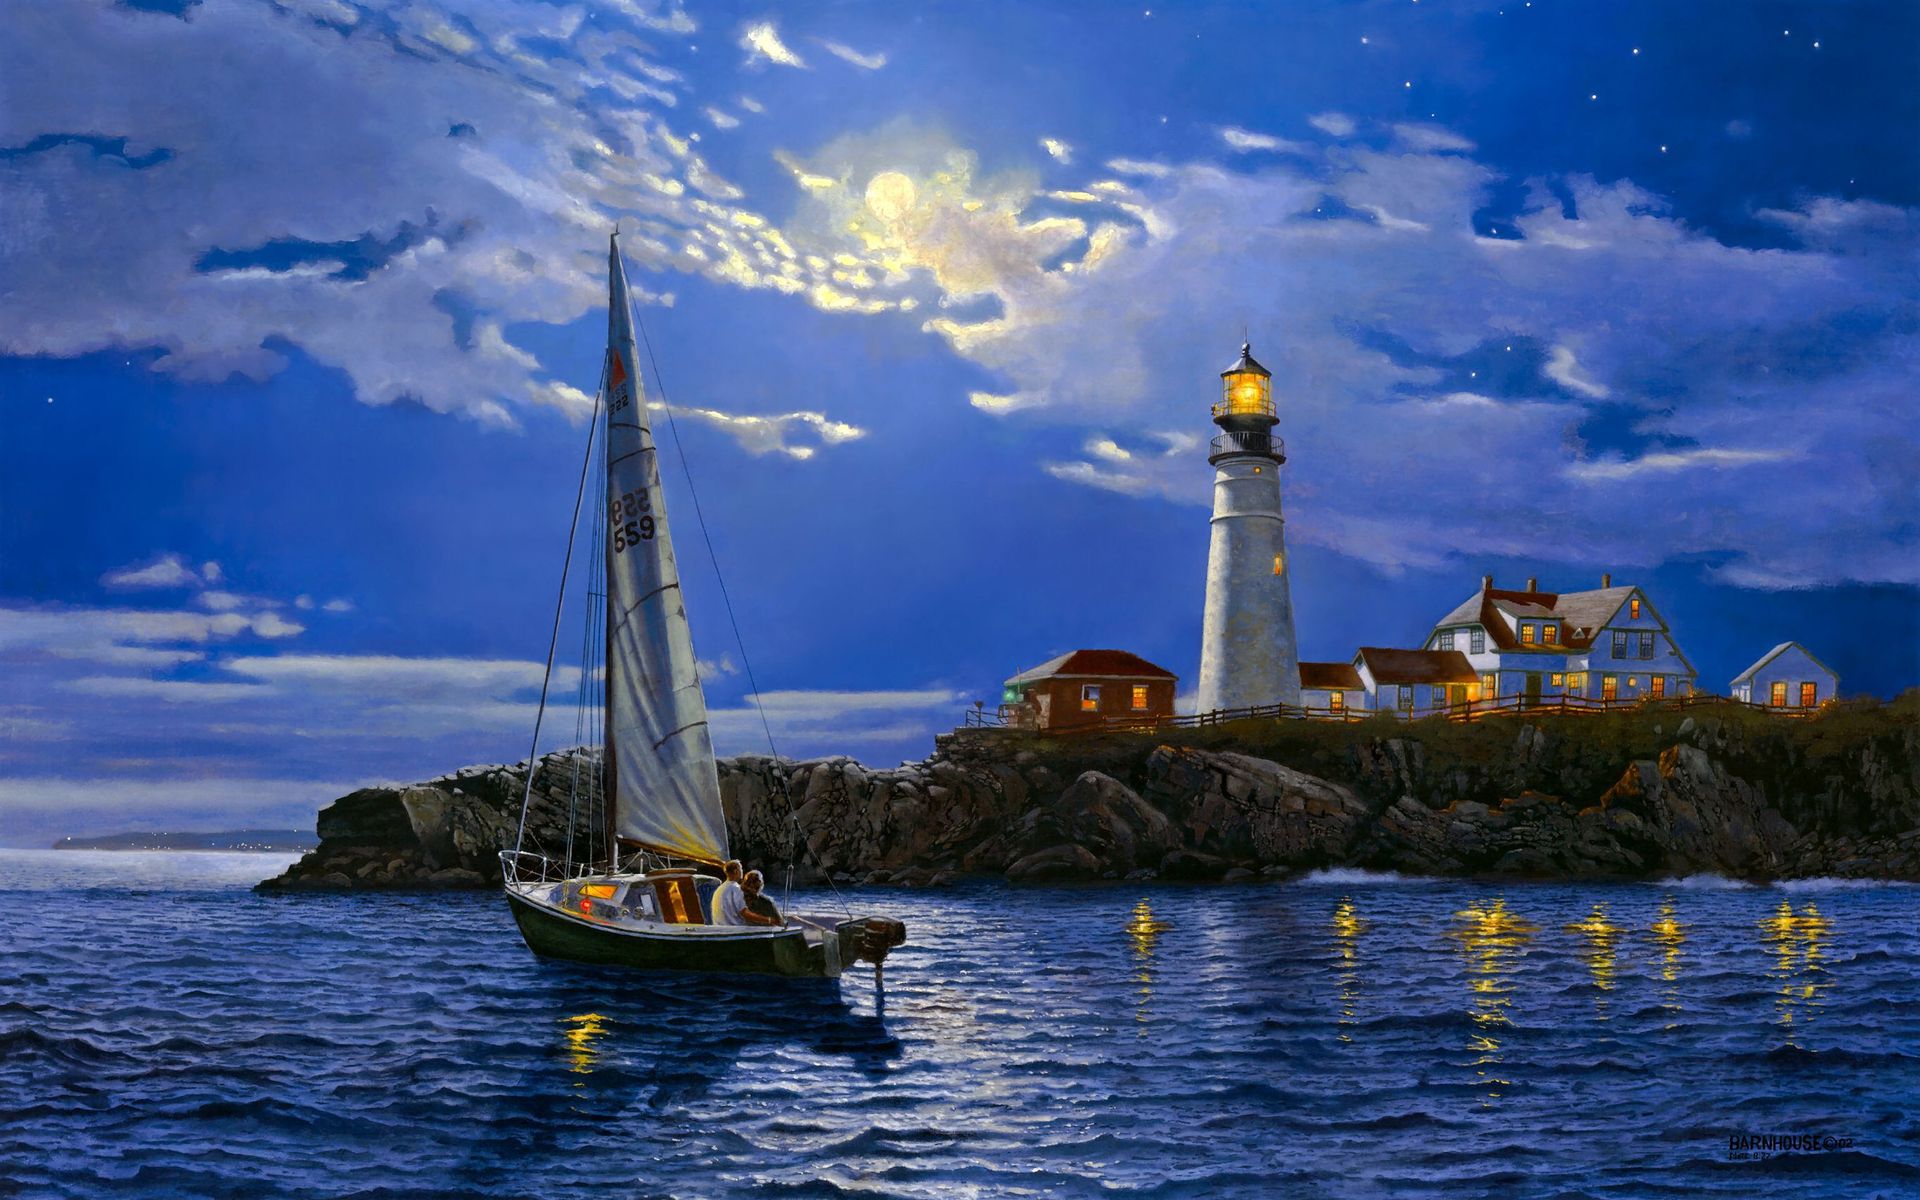 dave barnhouse, Barnhouse, Serenity, Prints, Paintings, Love, Romance, Lighthouses, Buildings, Architecture, Night, Evening, Dusk, Skies, Clouds, Seascapes, Landscapes, Vehicles, Boats, Nature, Moons Wallpaper